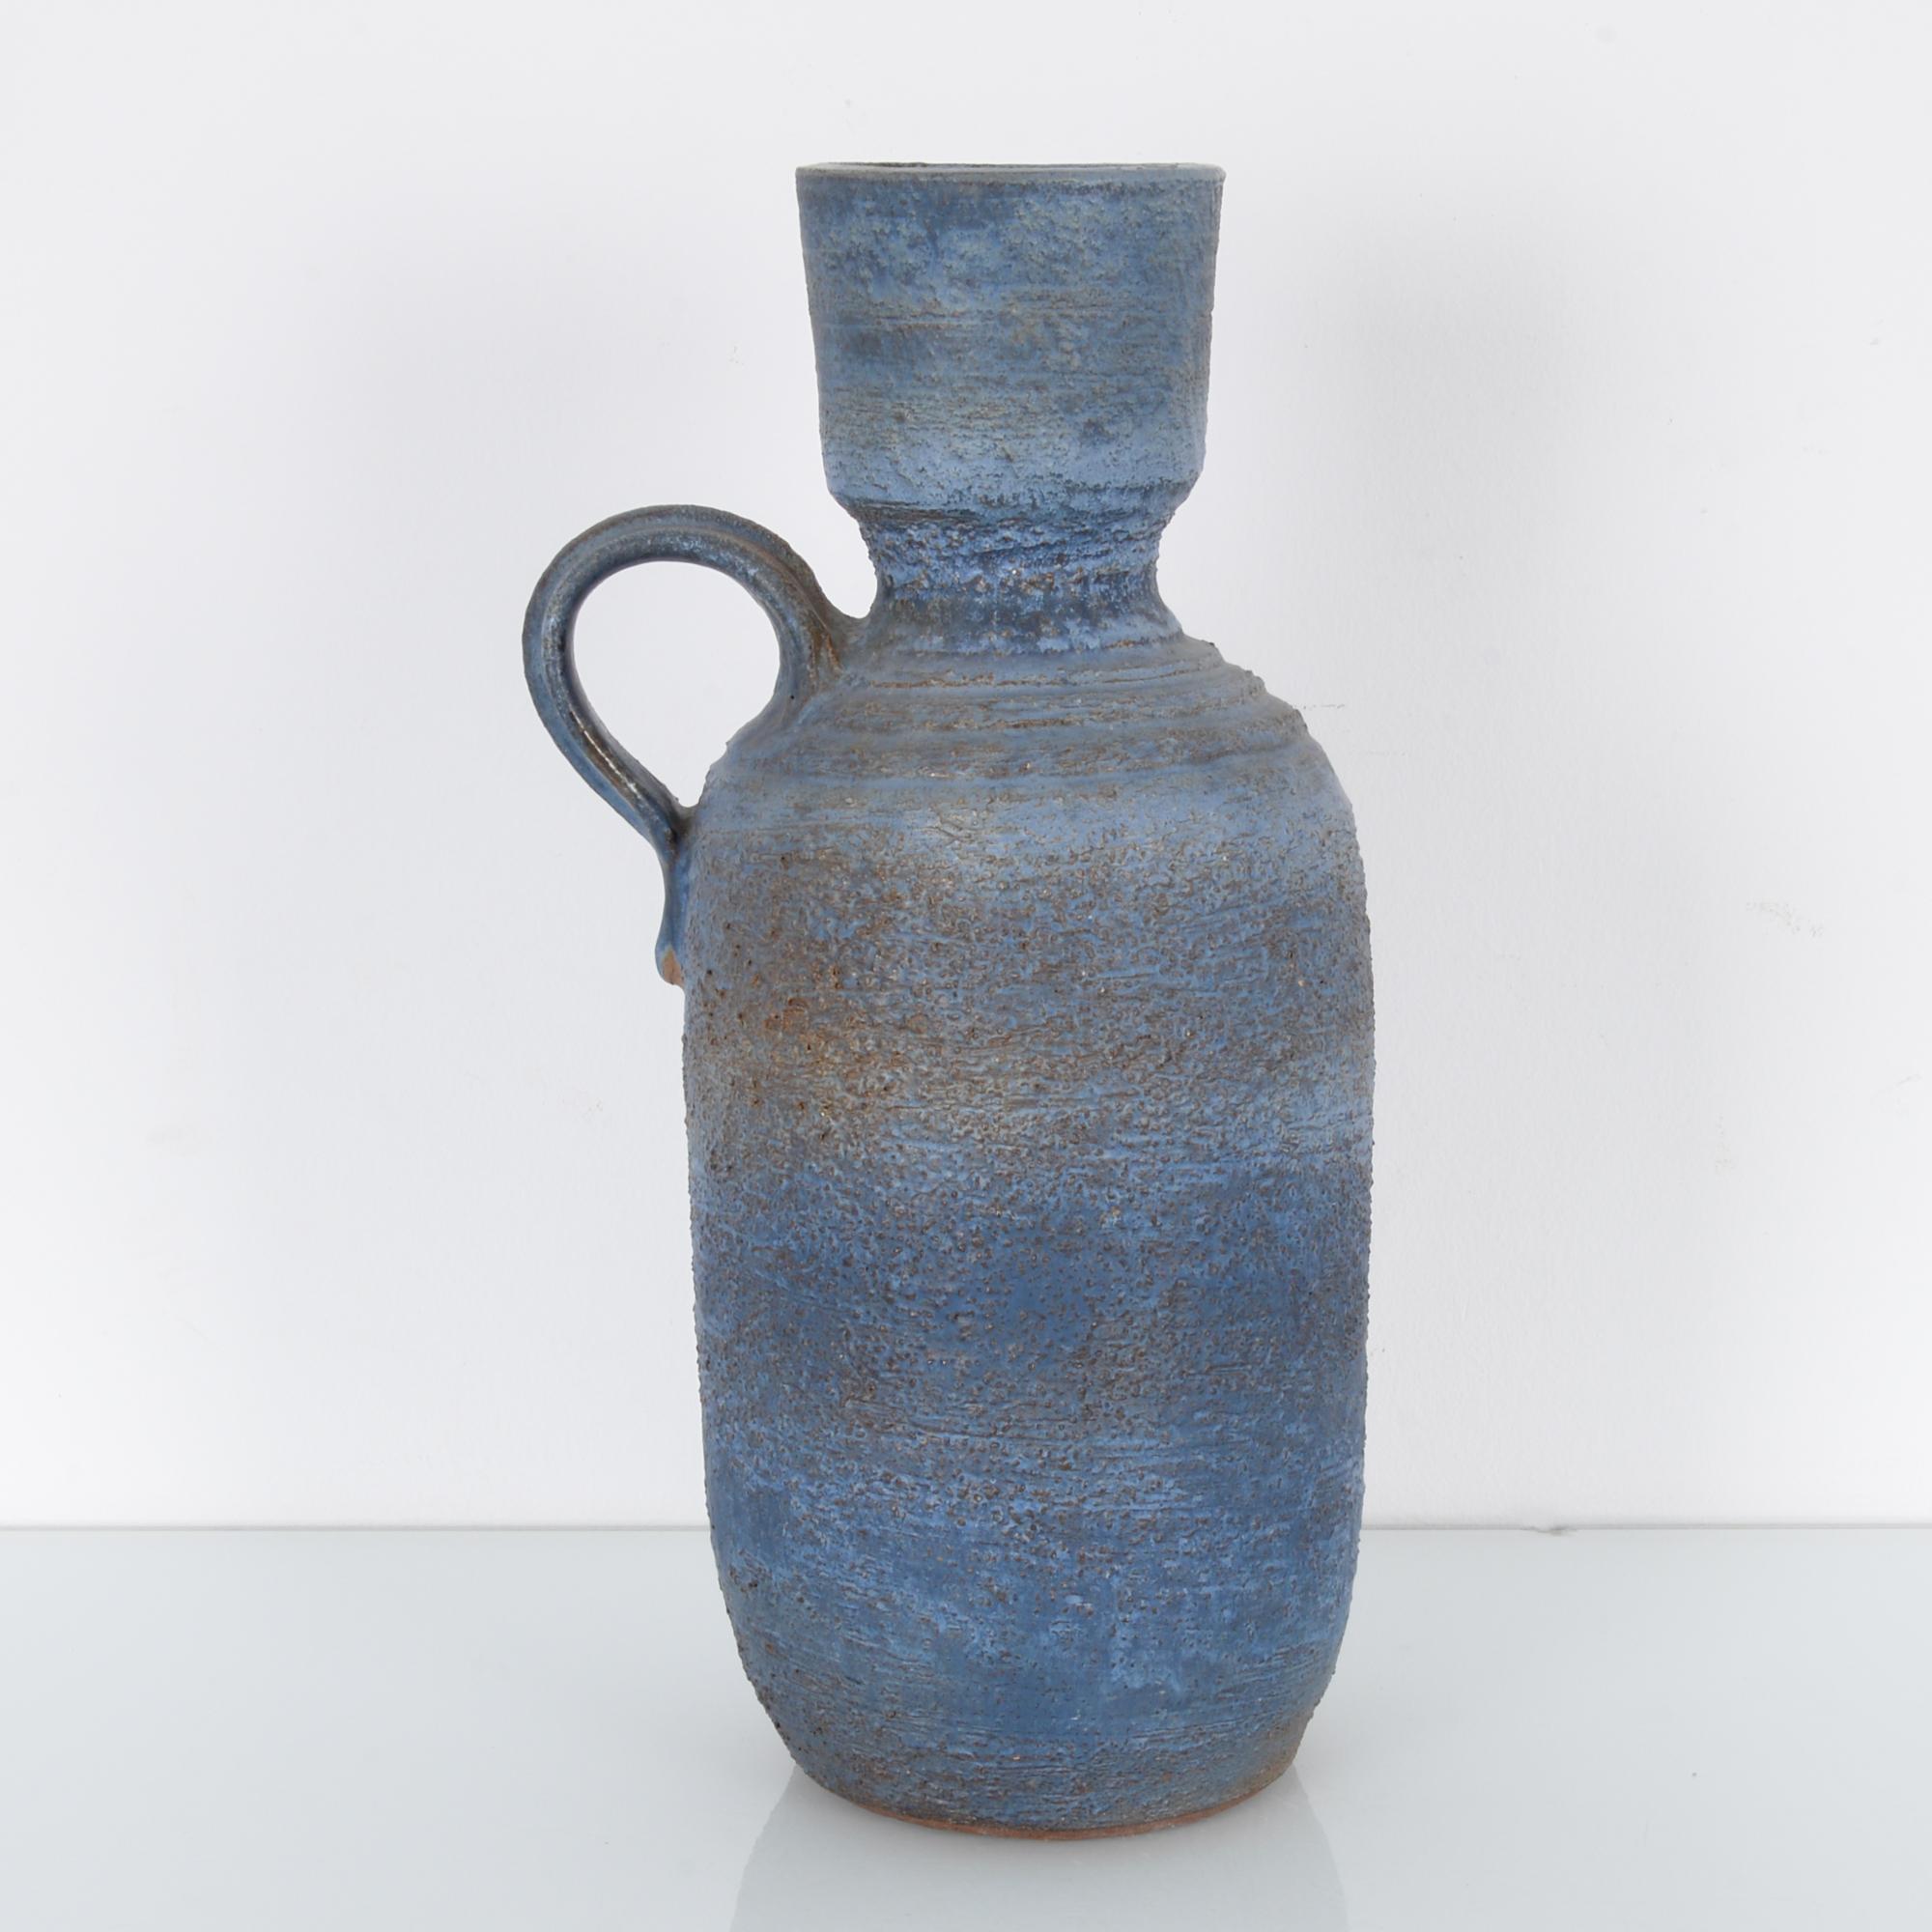 This ceramic vase was made in Germany, circa 1960. Its blue and gray glazed, textured surface and the stepped shoulder display the experimentation characteristic of West German pottery from this era. A circular handle sits on one shoulder.